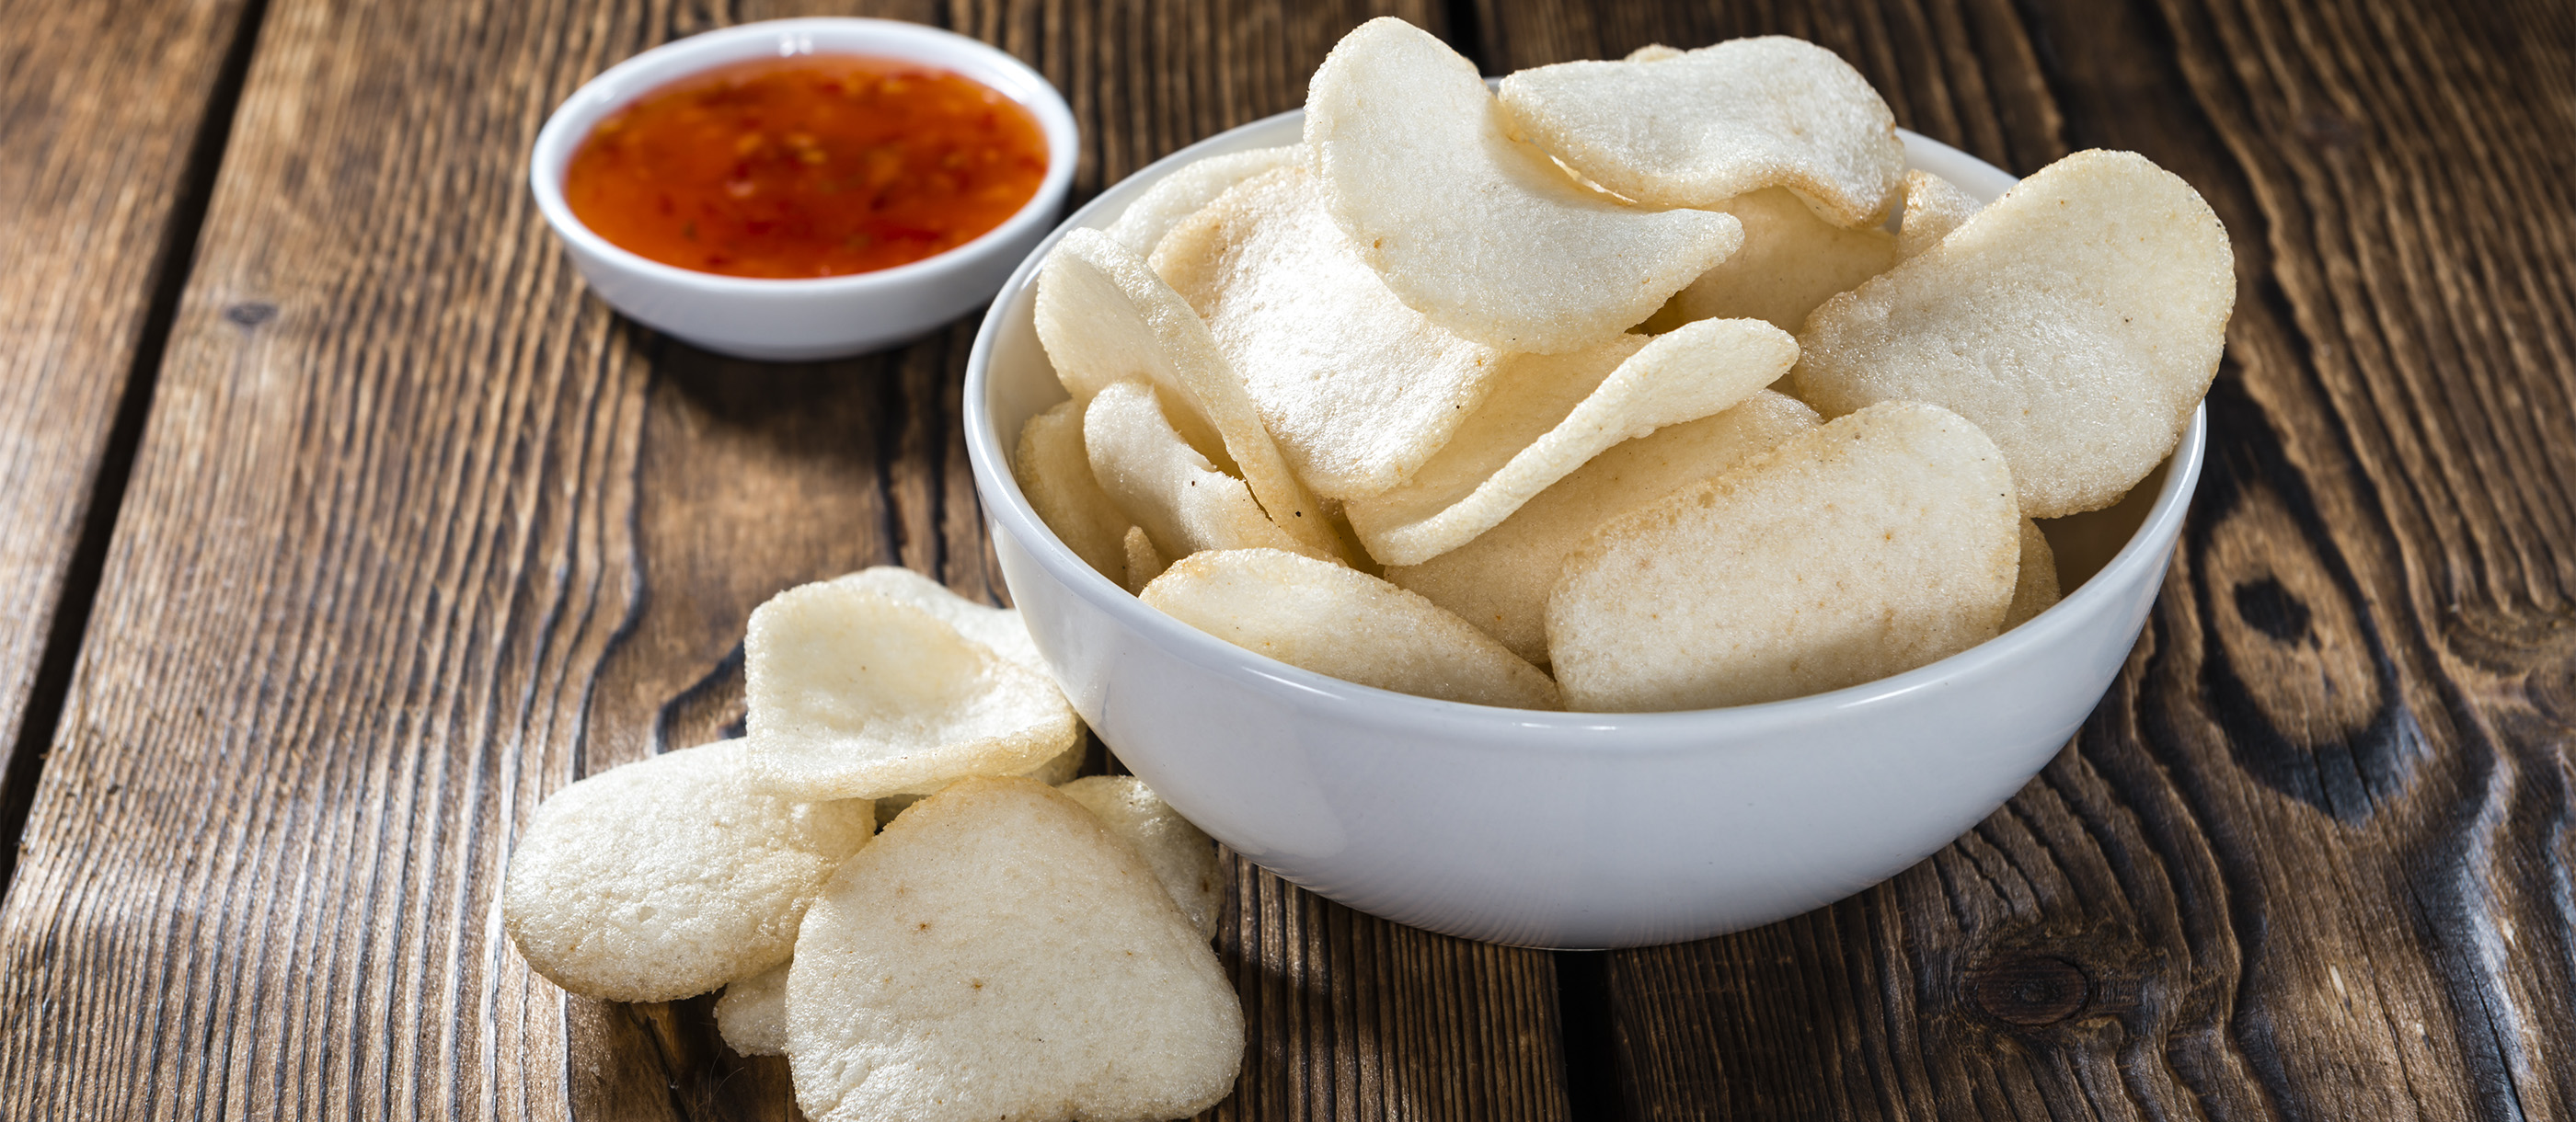 Krupuk | Traditional Snack From Indonesia, Southeast Asia